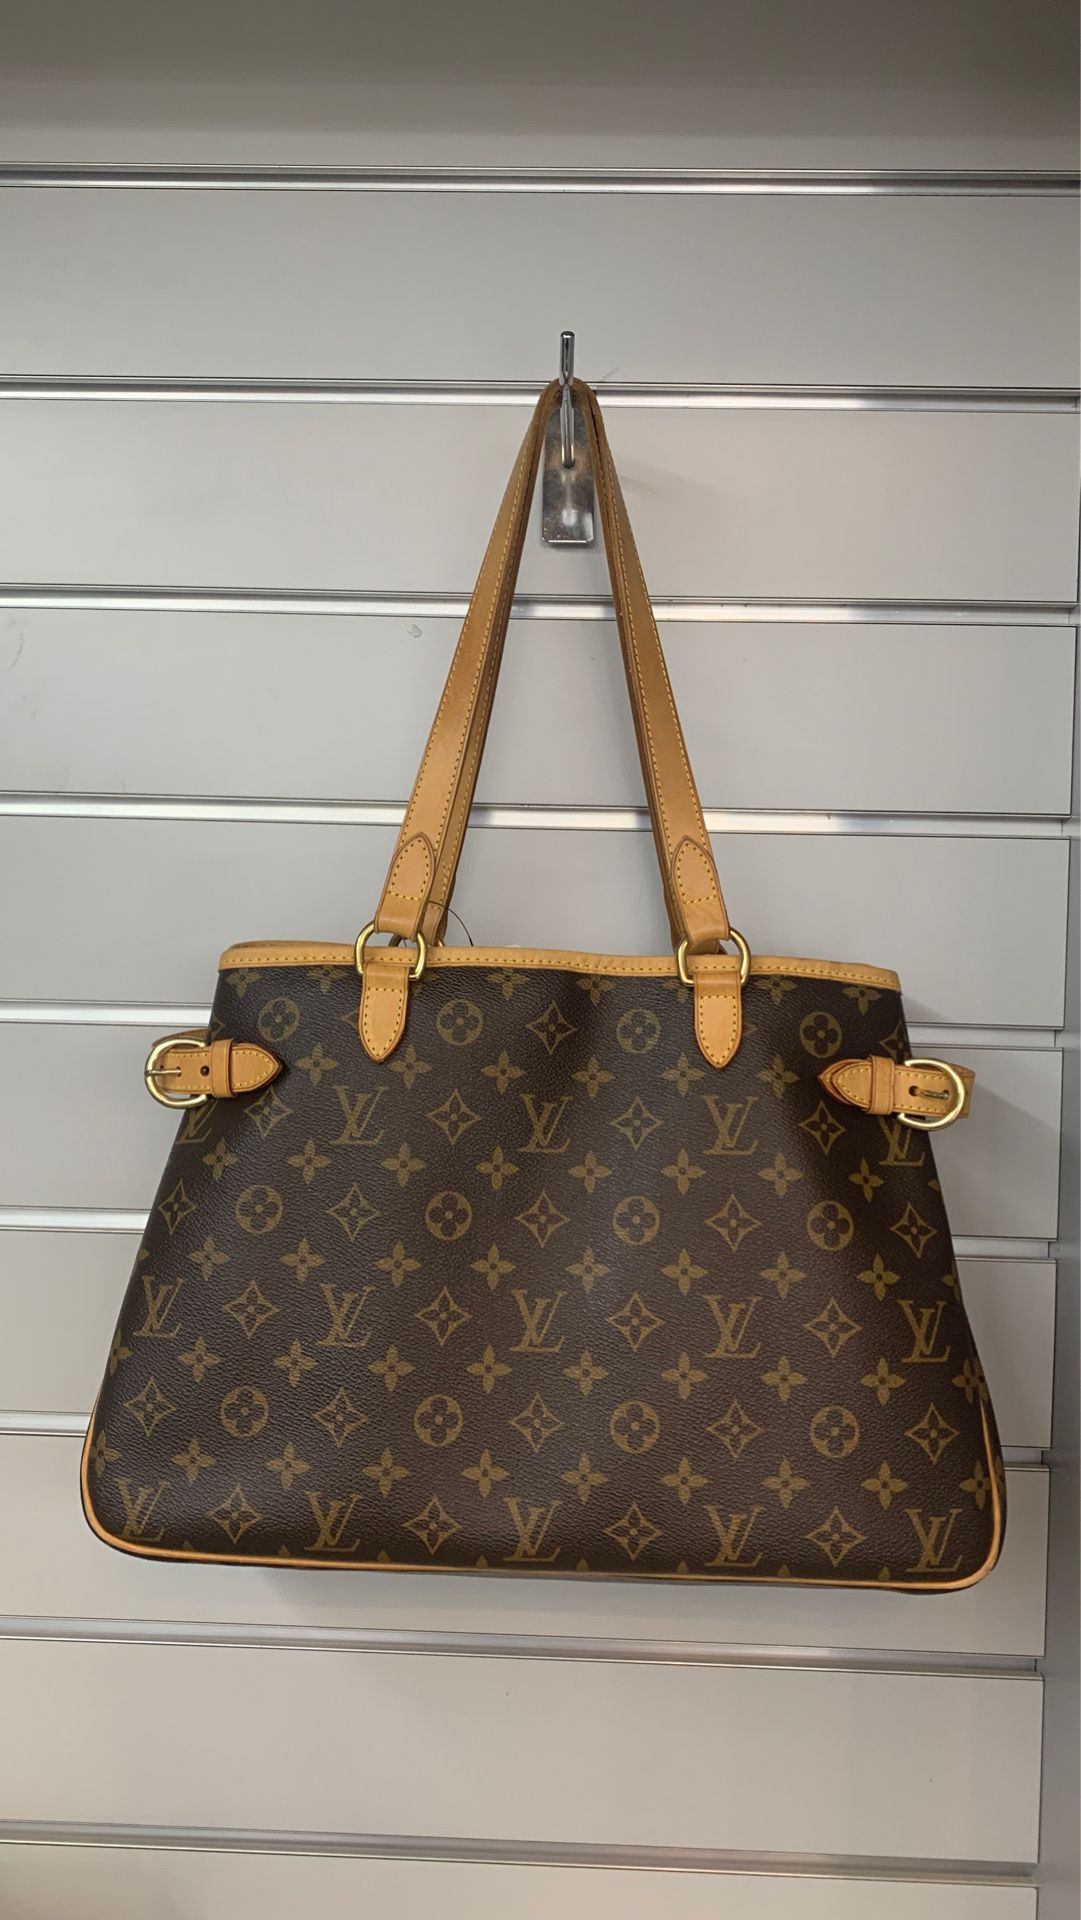 Louis Vuitton certified authentic hand bag peruse.